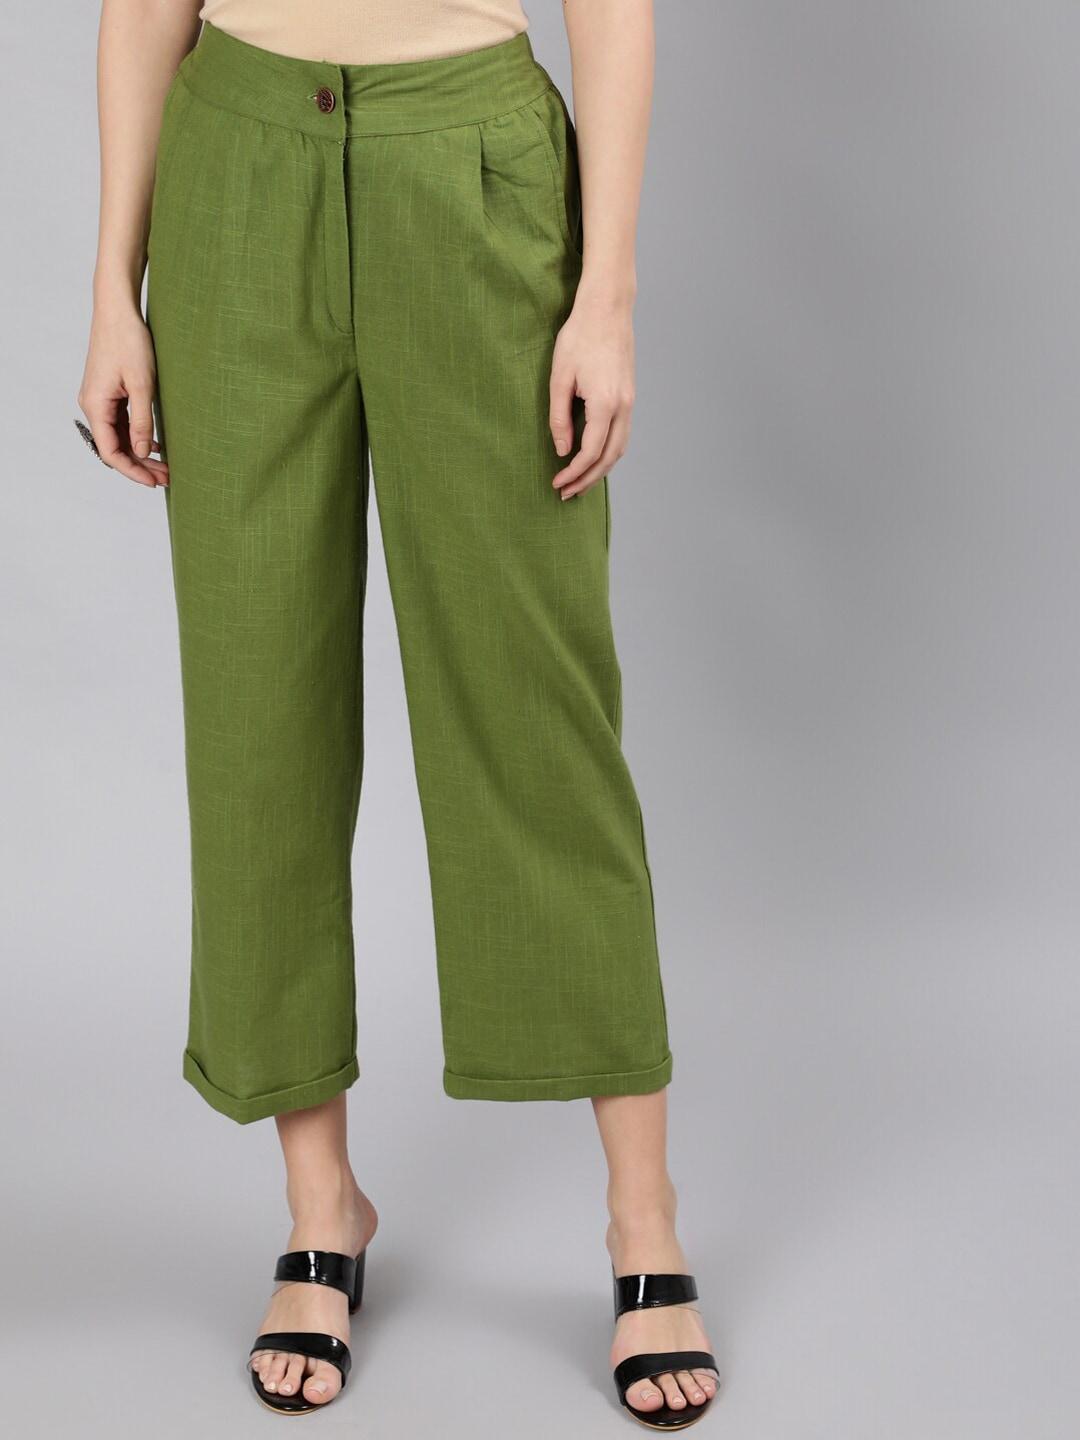 jaipur-kurti-women-green-straight-fit-high-rise-pleated-cotton-trousers